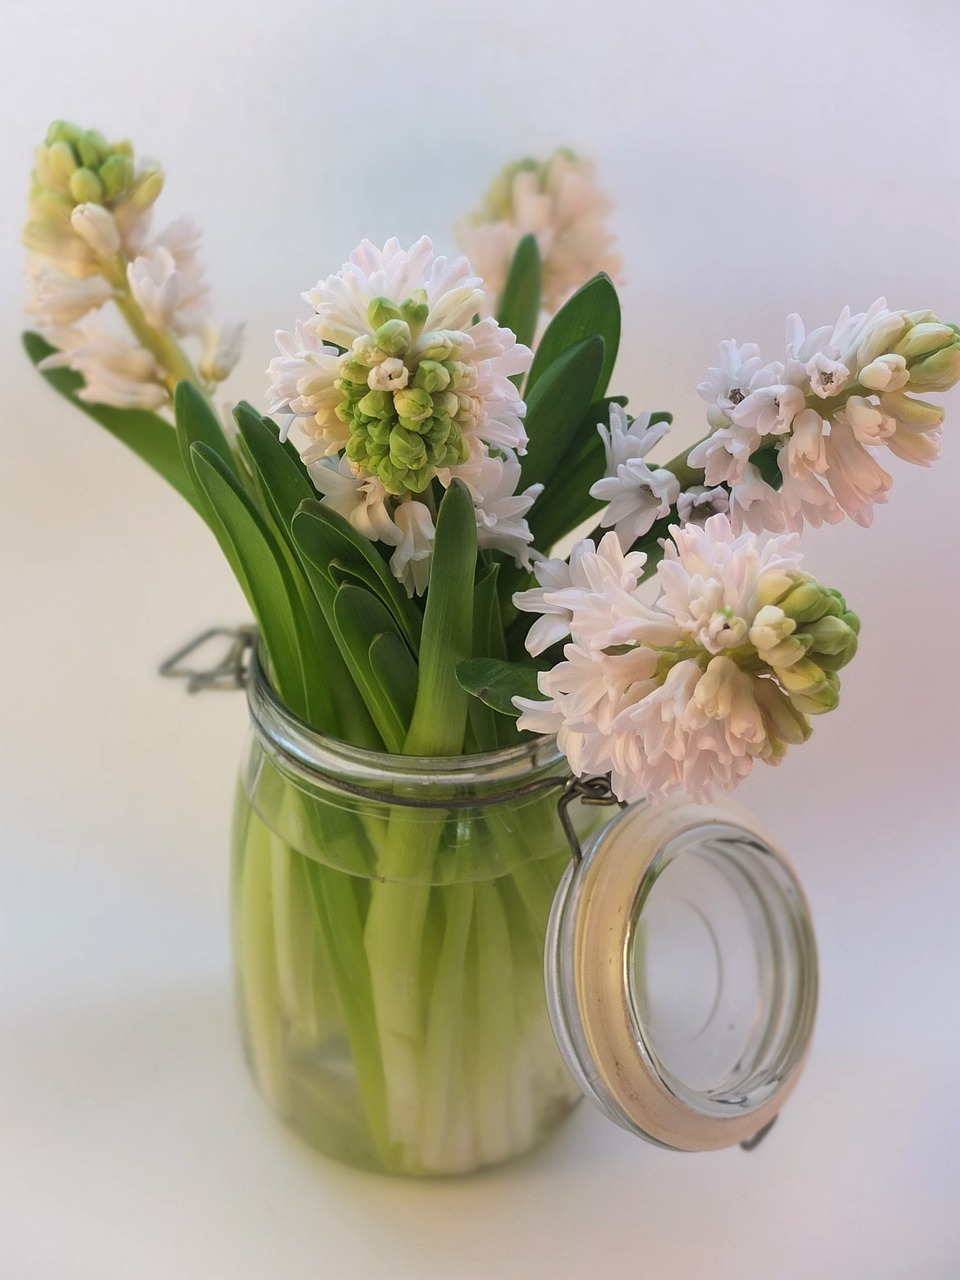 Image of light-pint hyacinths in a flip-top ball jar by Cally Lawson from Pixabay